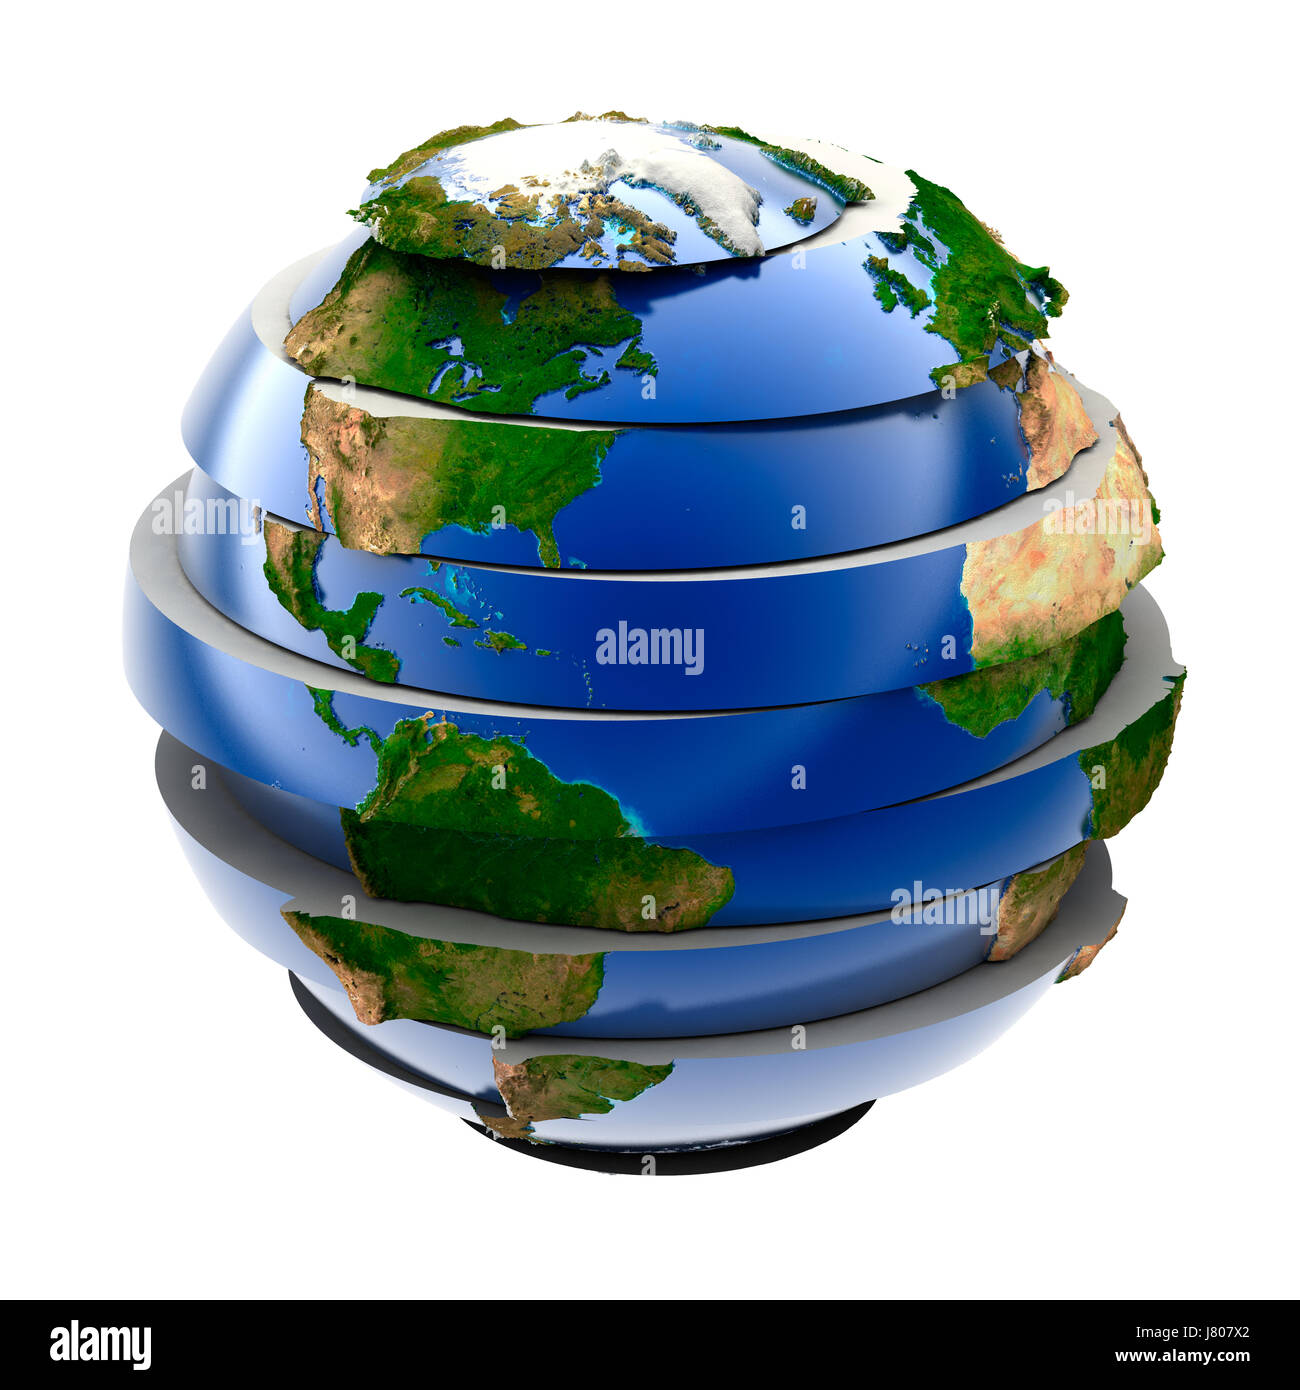 isolated toy globe planet earth world jigsaw puzzle jigsaw puzzle piece  section Stock Photo - Alamy